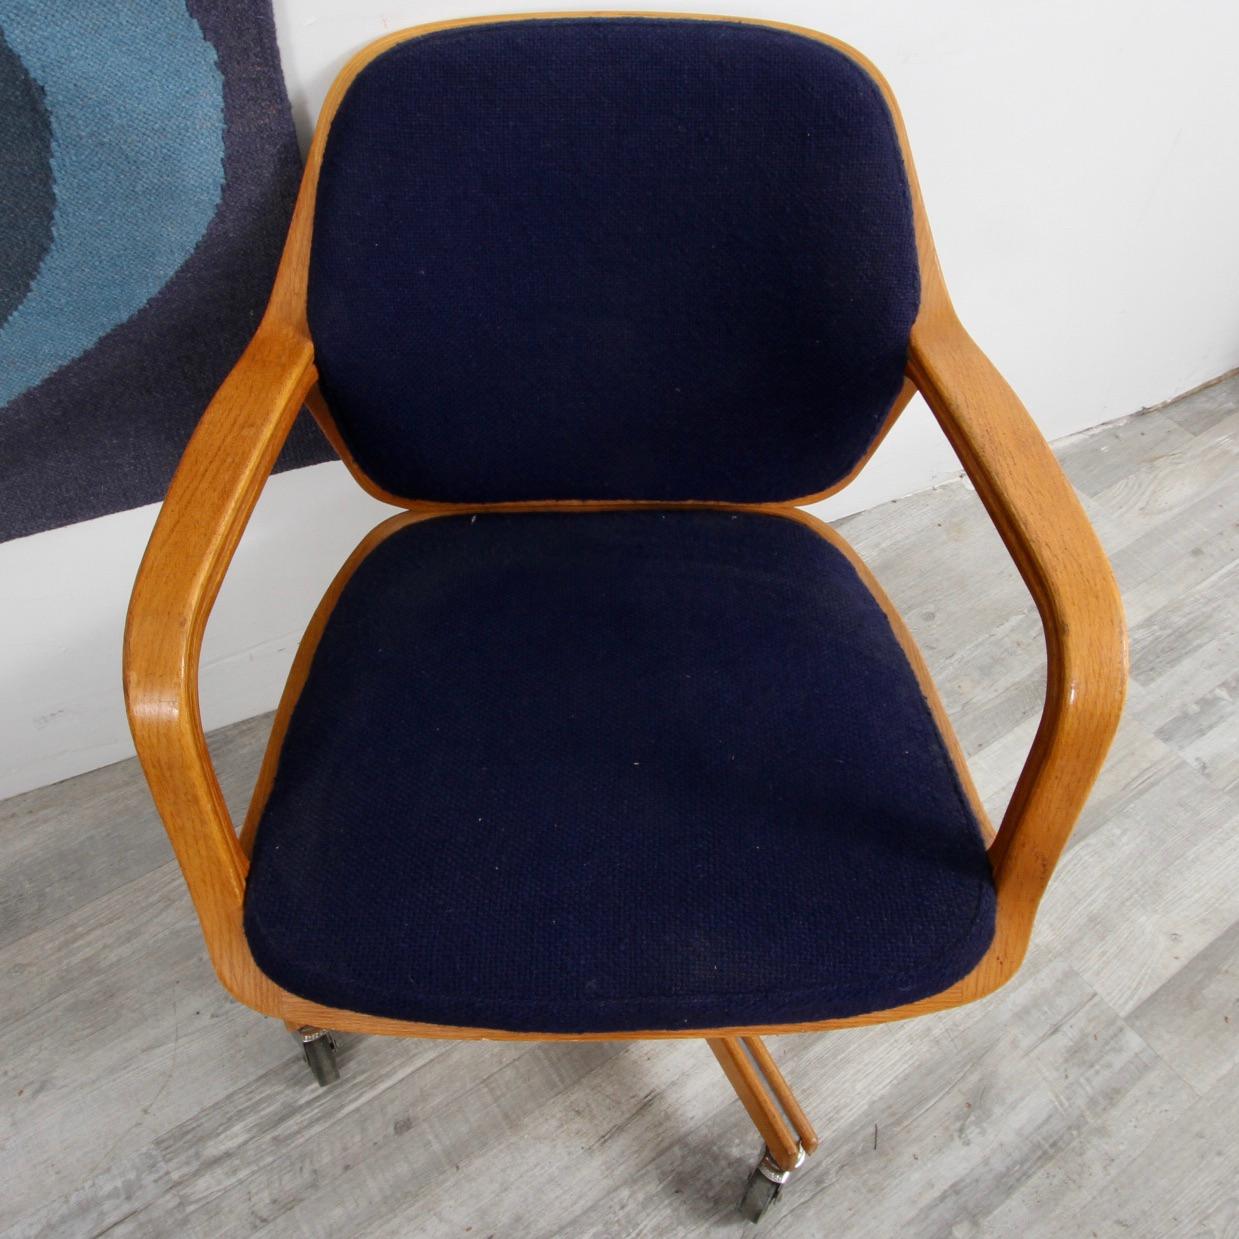 20th Century Knoll Task Arm Chairs. by Bill Stephens For Sale